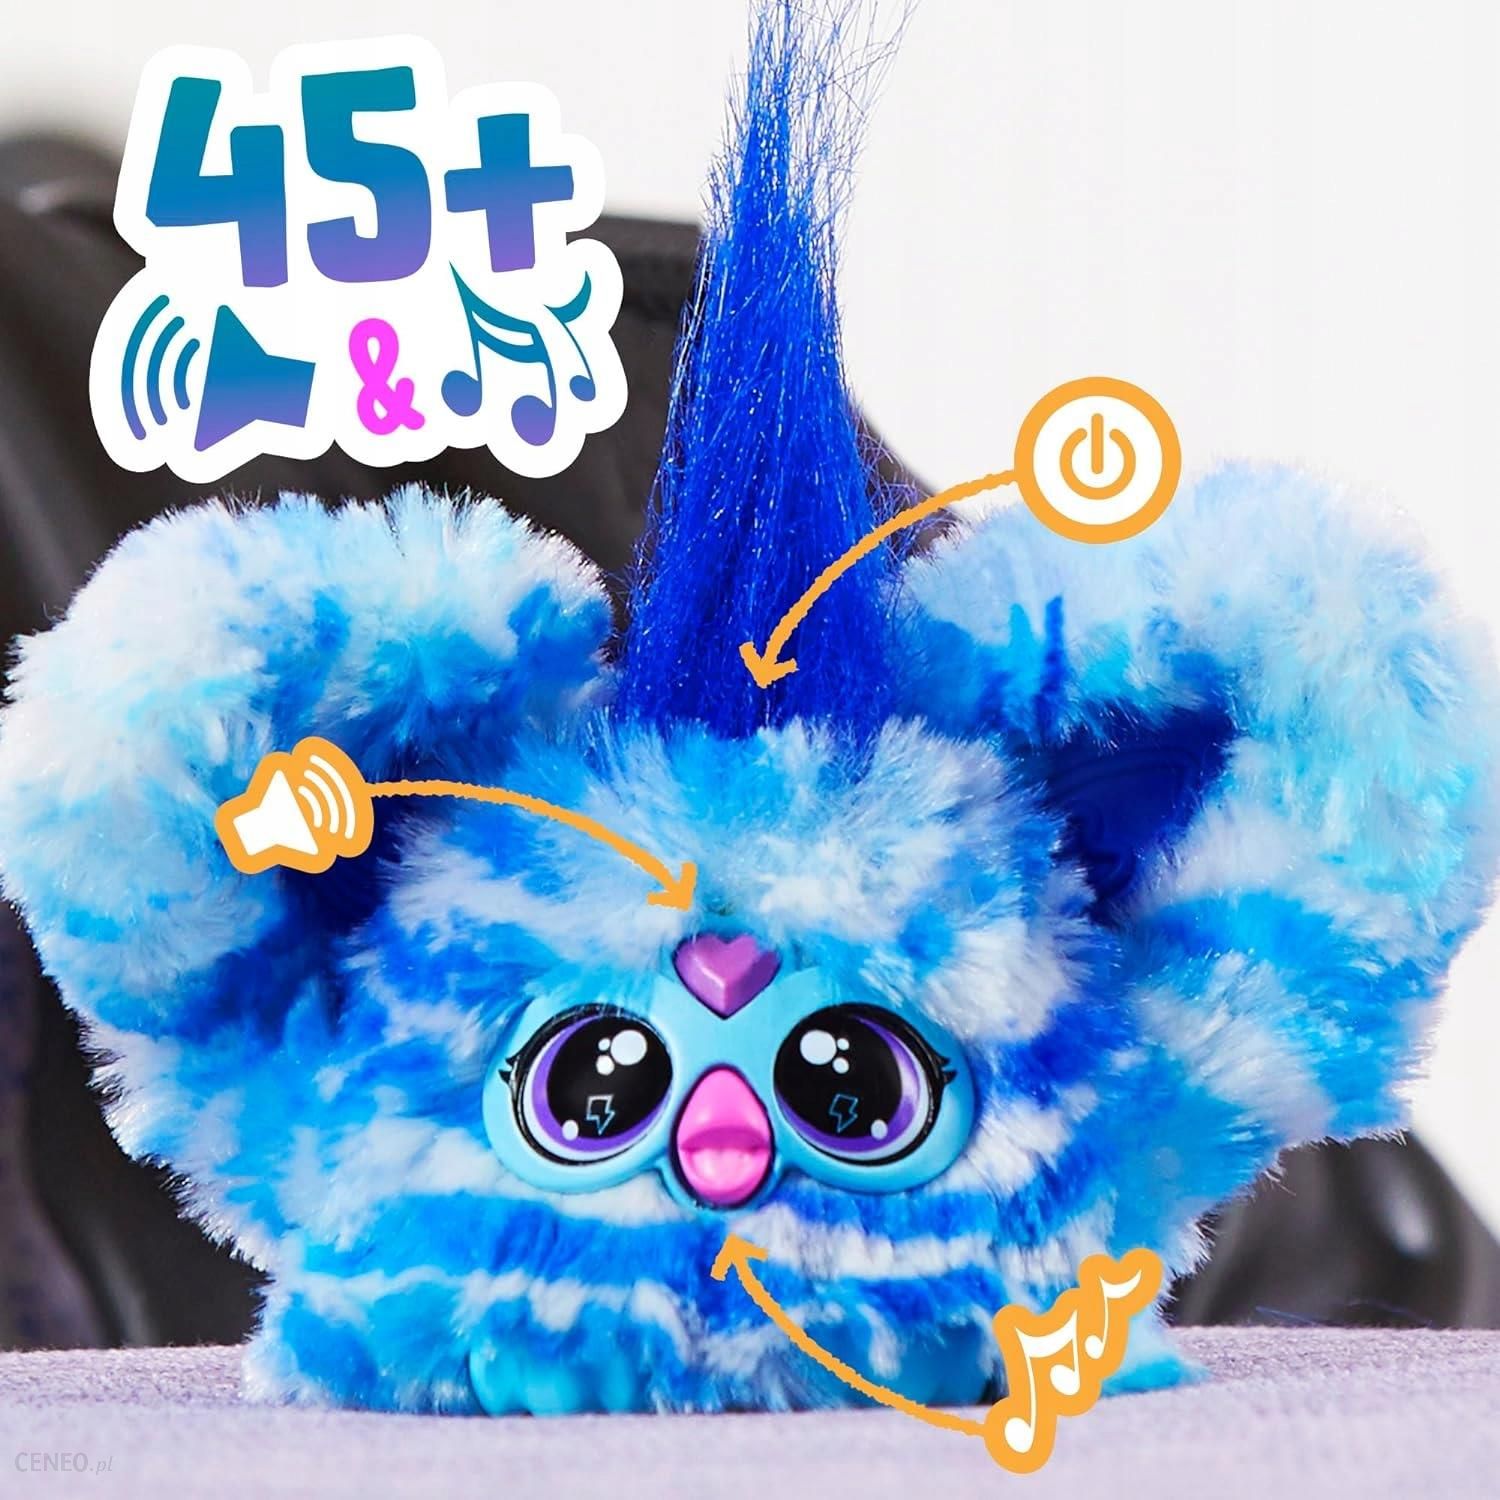 A Furby for the road: Meet the ultra-portable, fully interactive Furby  Furblets (exclusive)